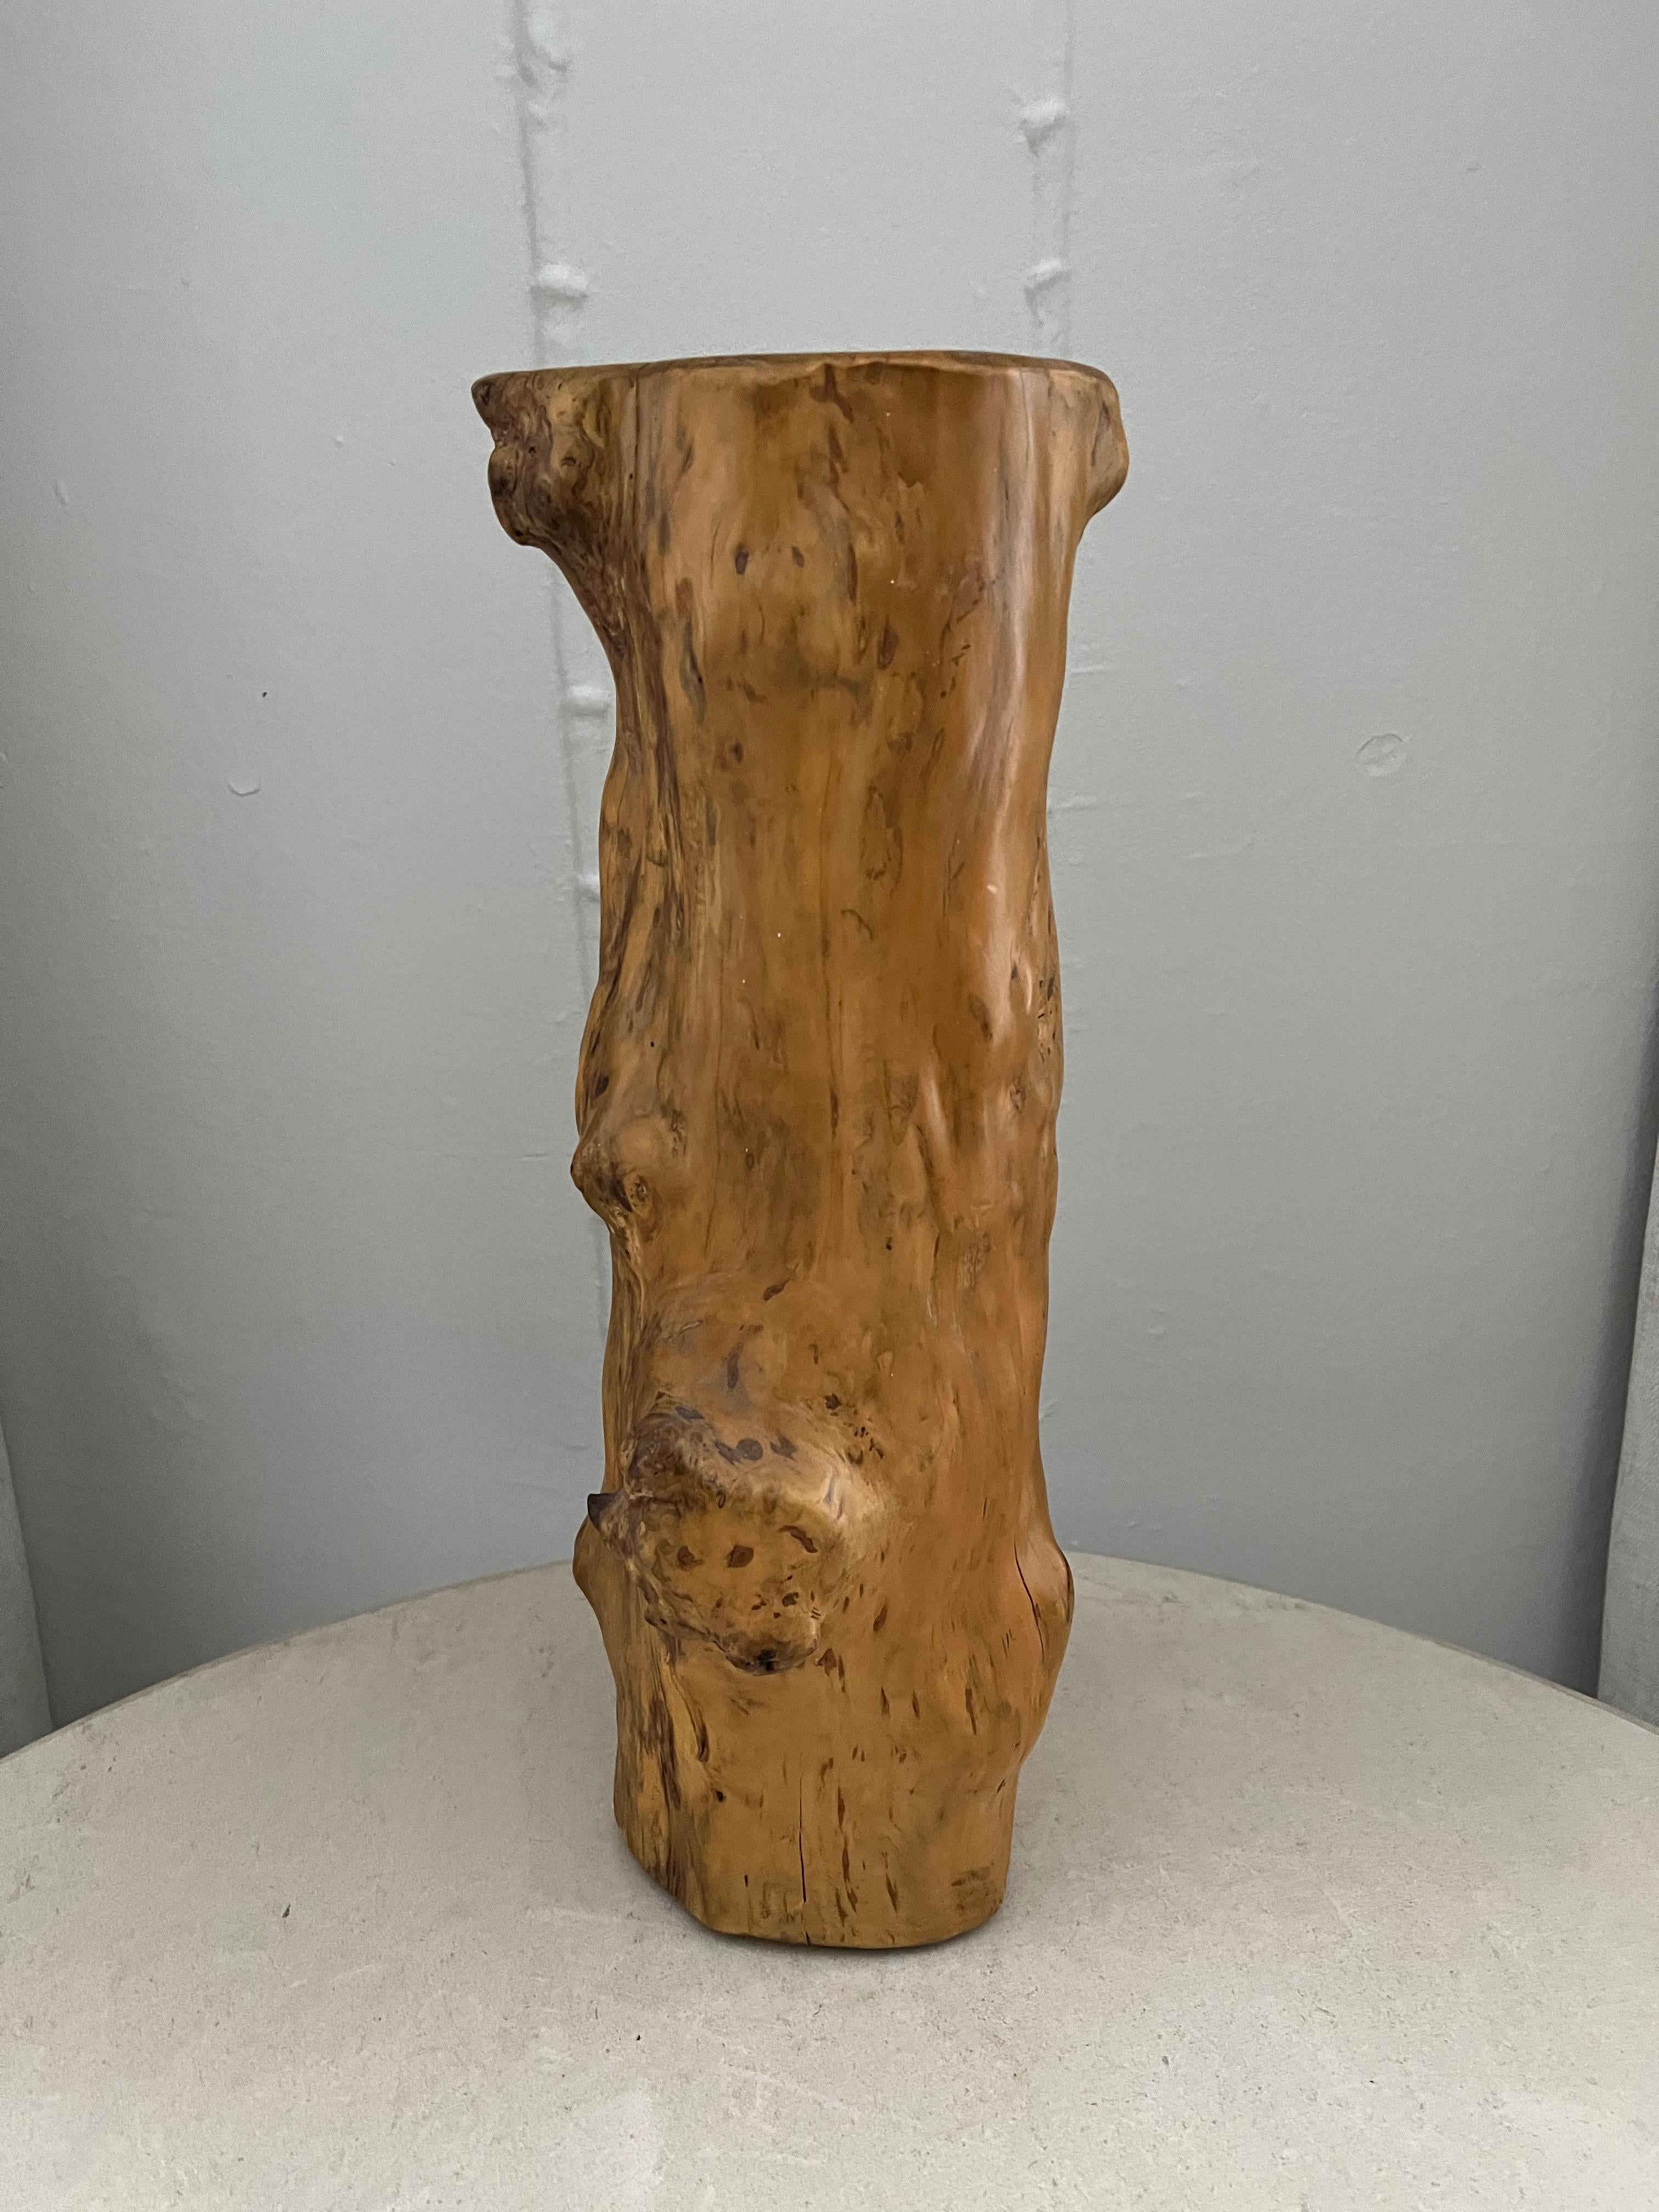 Smooth piece of organic shaped driftwood. Stands upright, with a flat base. An opening at the top has been carved out, making this an interesting vase or planter. Could be used creatively for a number of rooms, anywhere where natural elements are